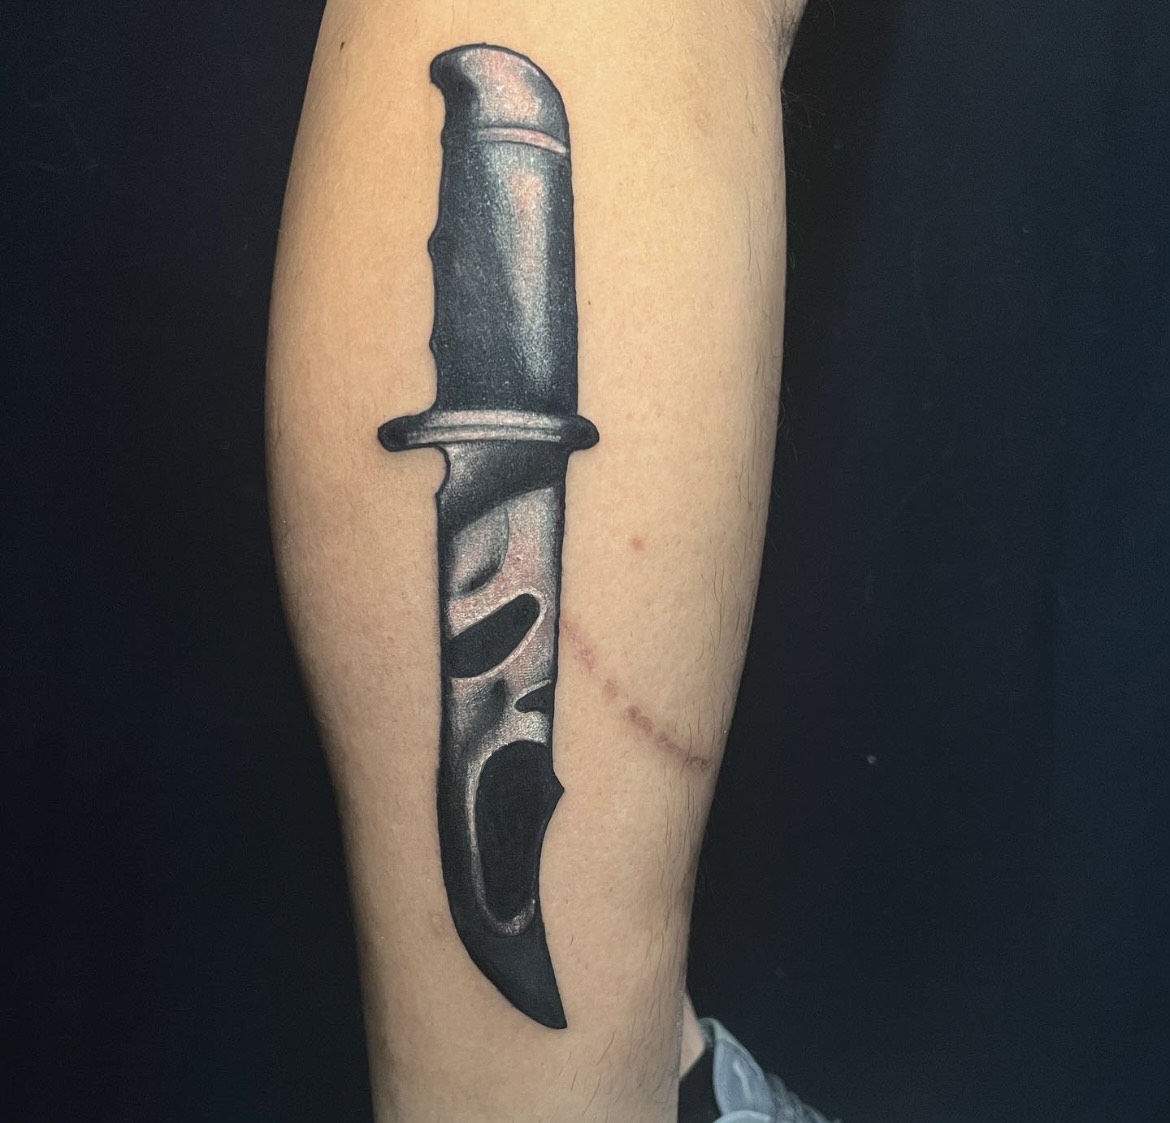 Tattoo Inspired Buck Knife and Leaves